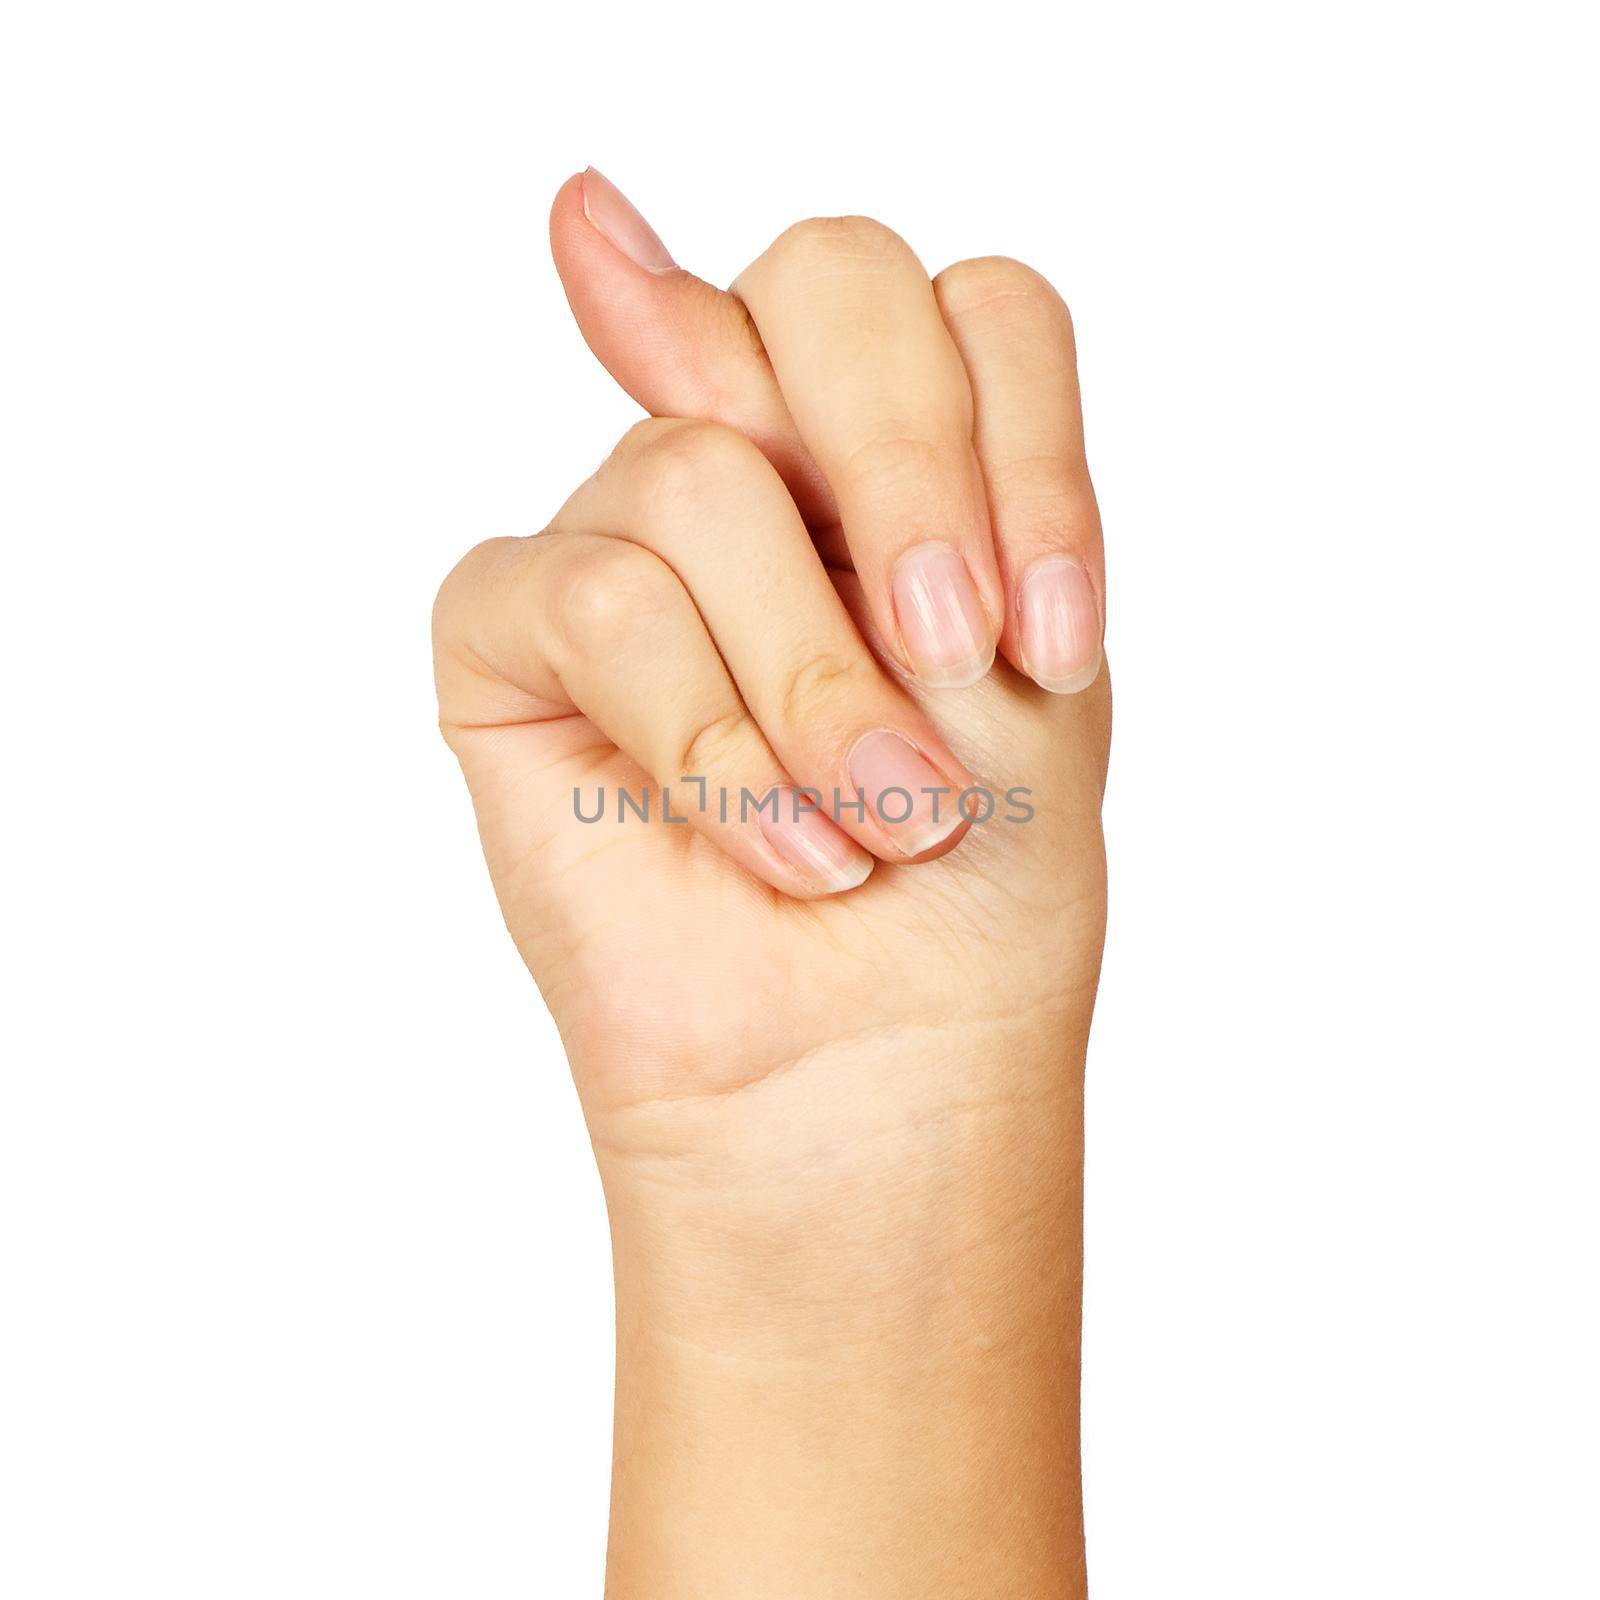 american sign language. female hand showing letter n. isolated on white background